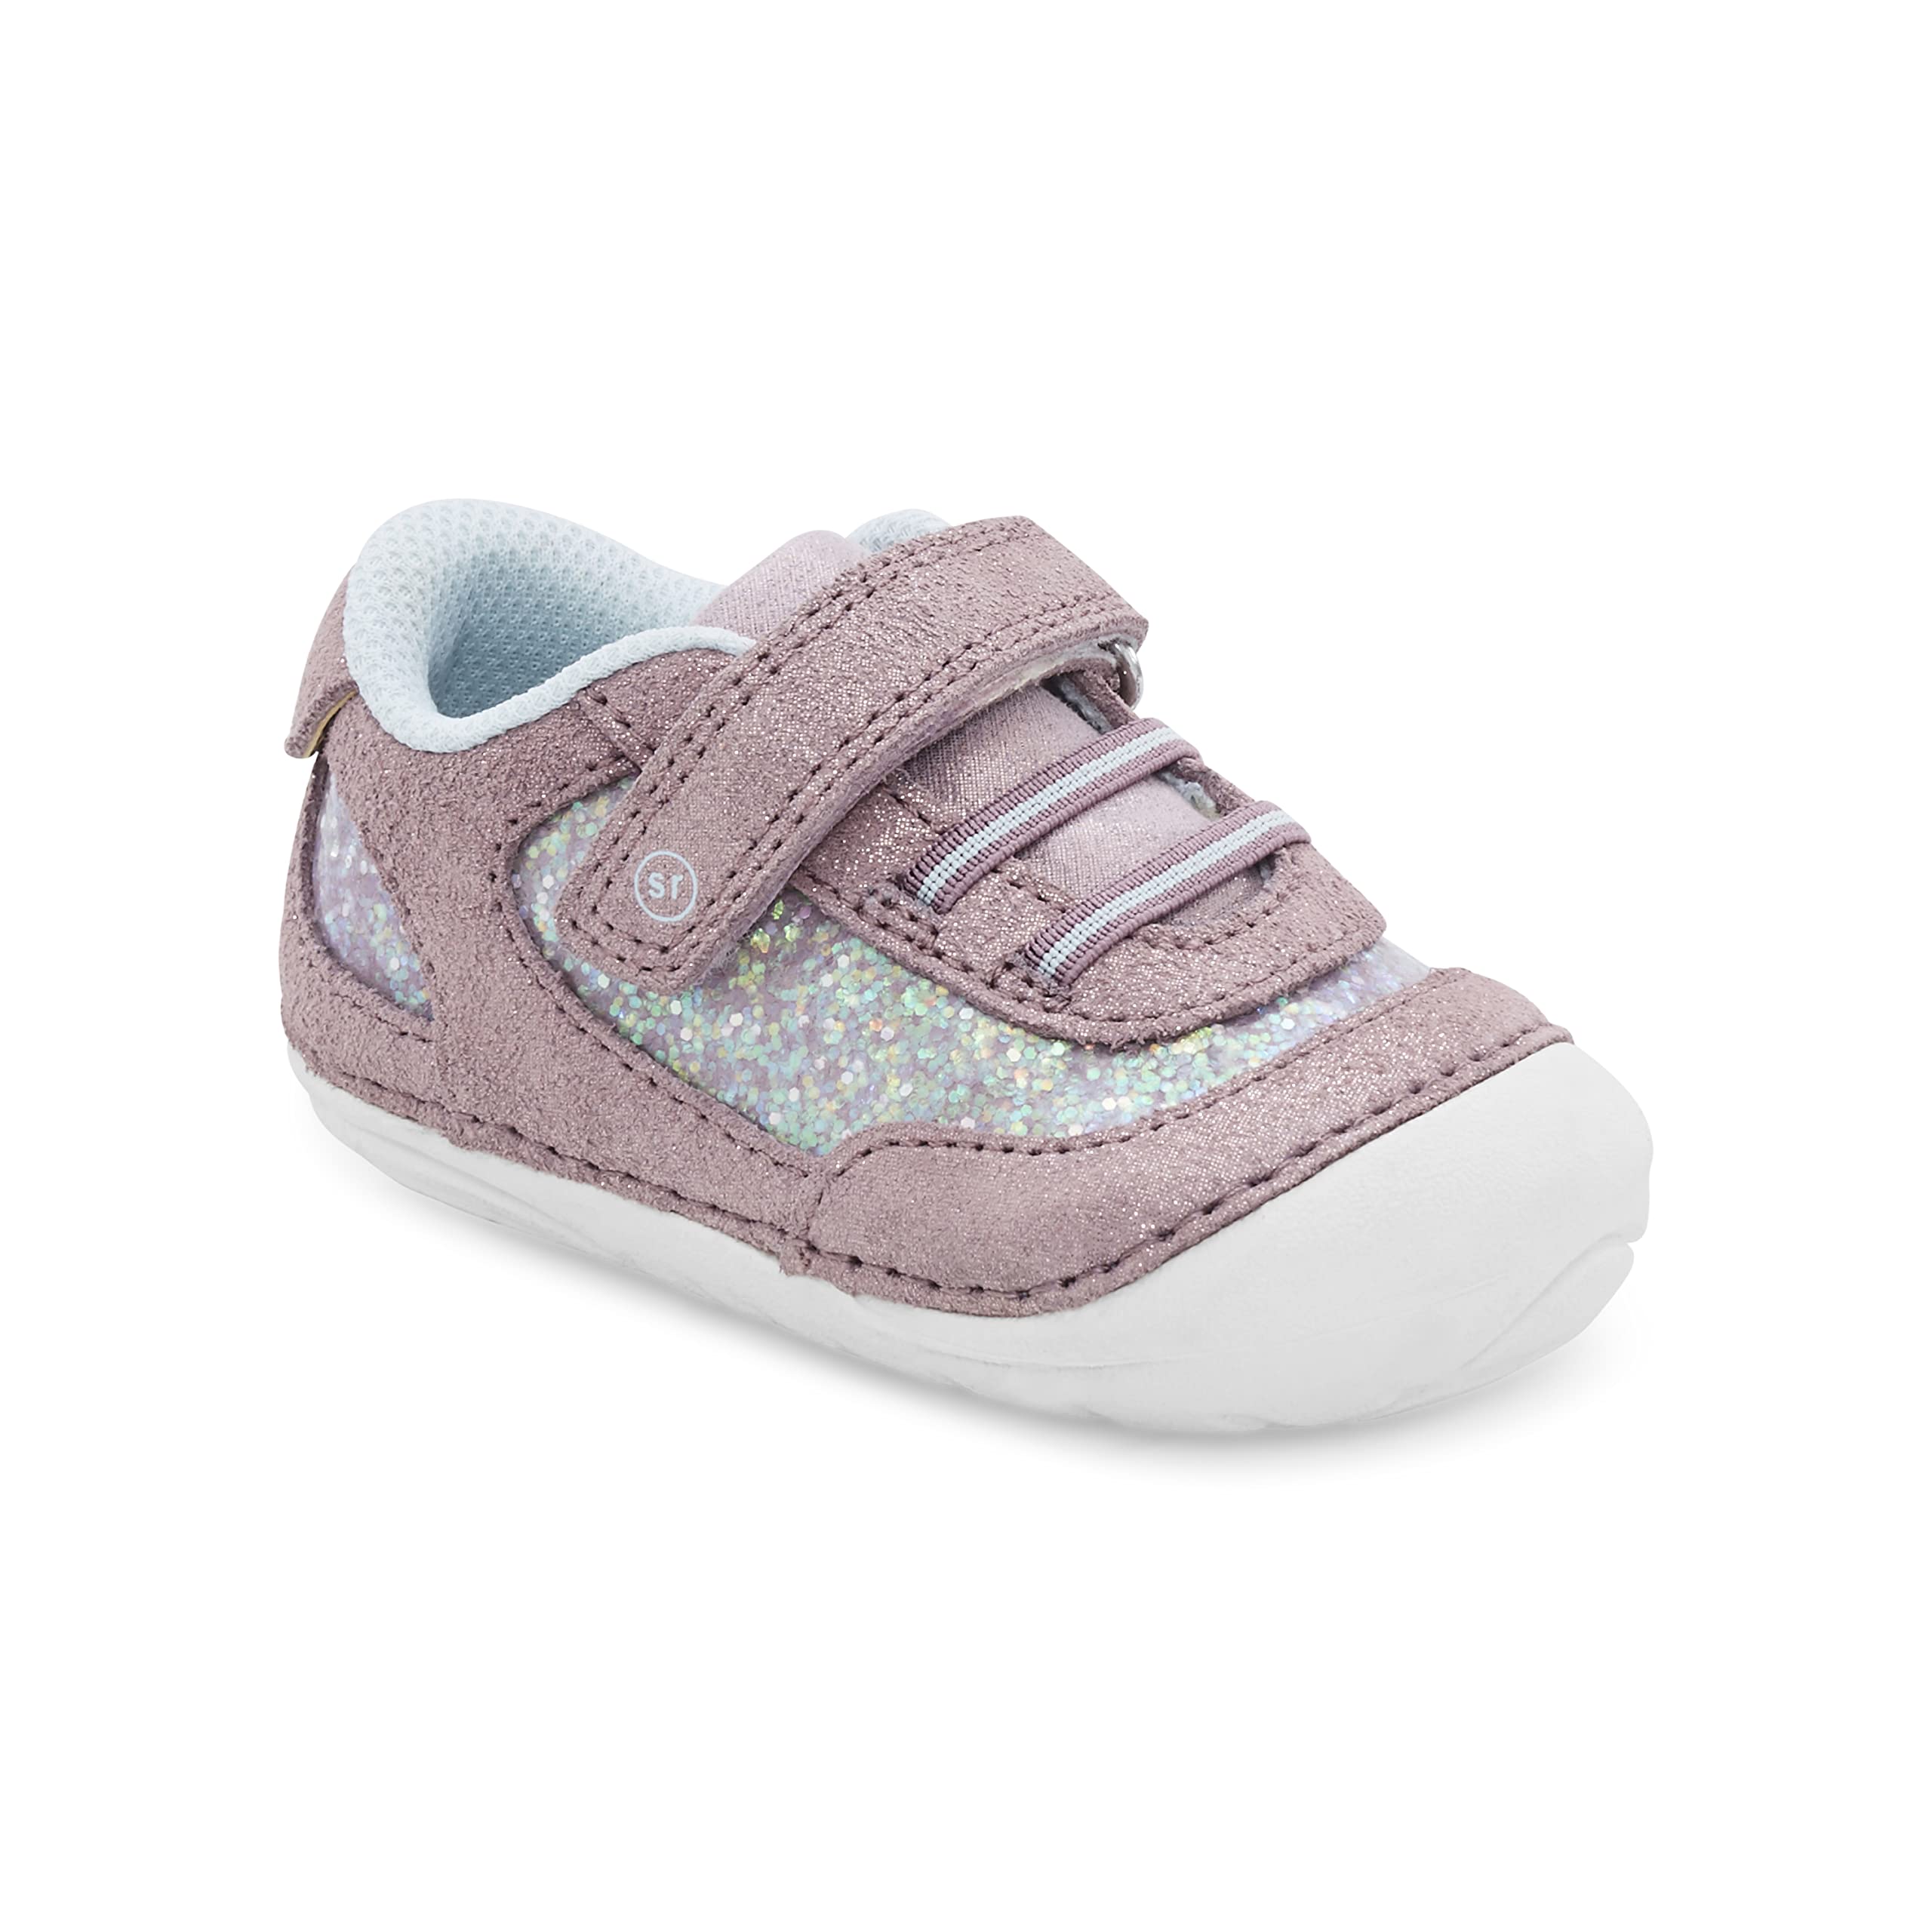 Stride Rite Soft Motion Baby and Toddler Girls Jazzy Athletic Sneaker